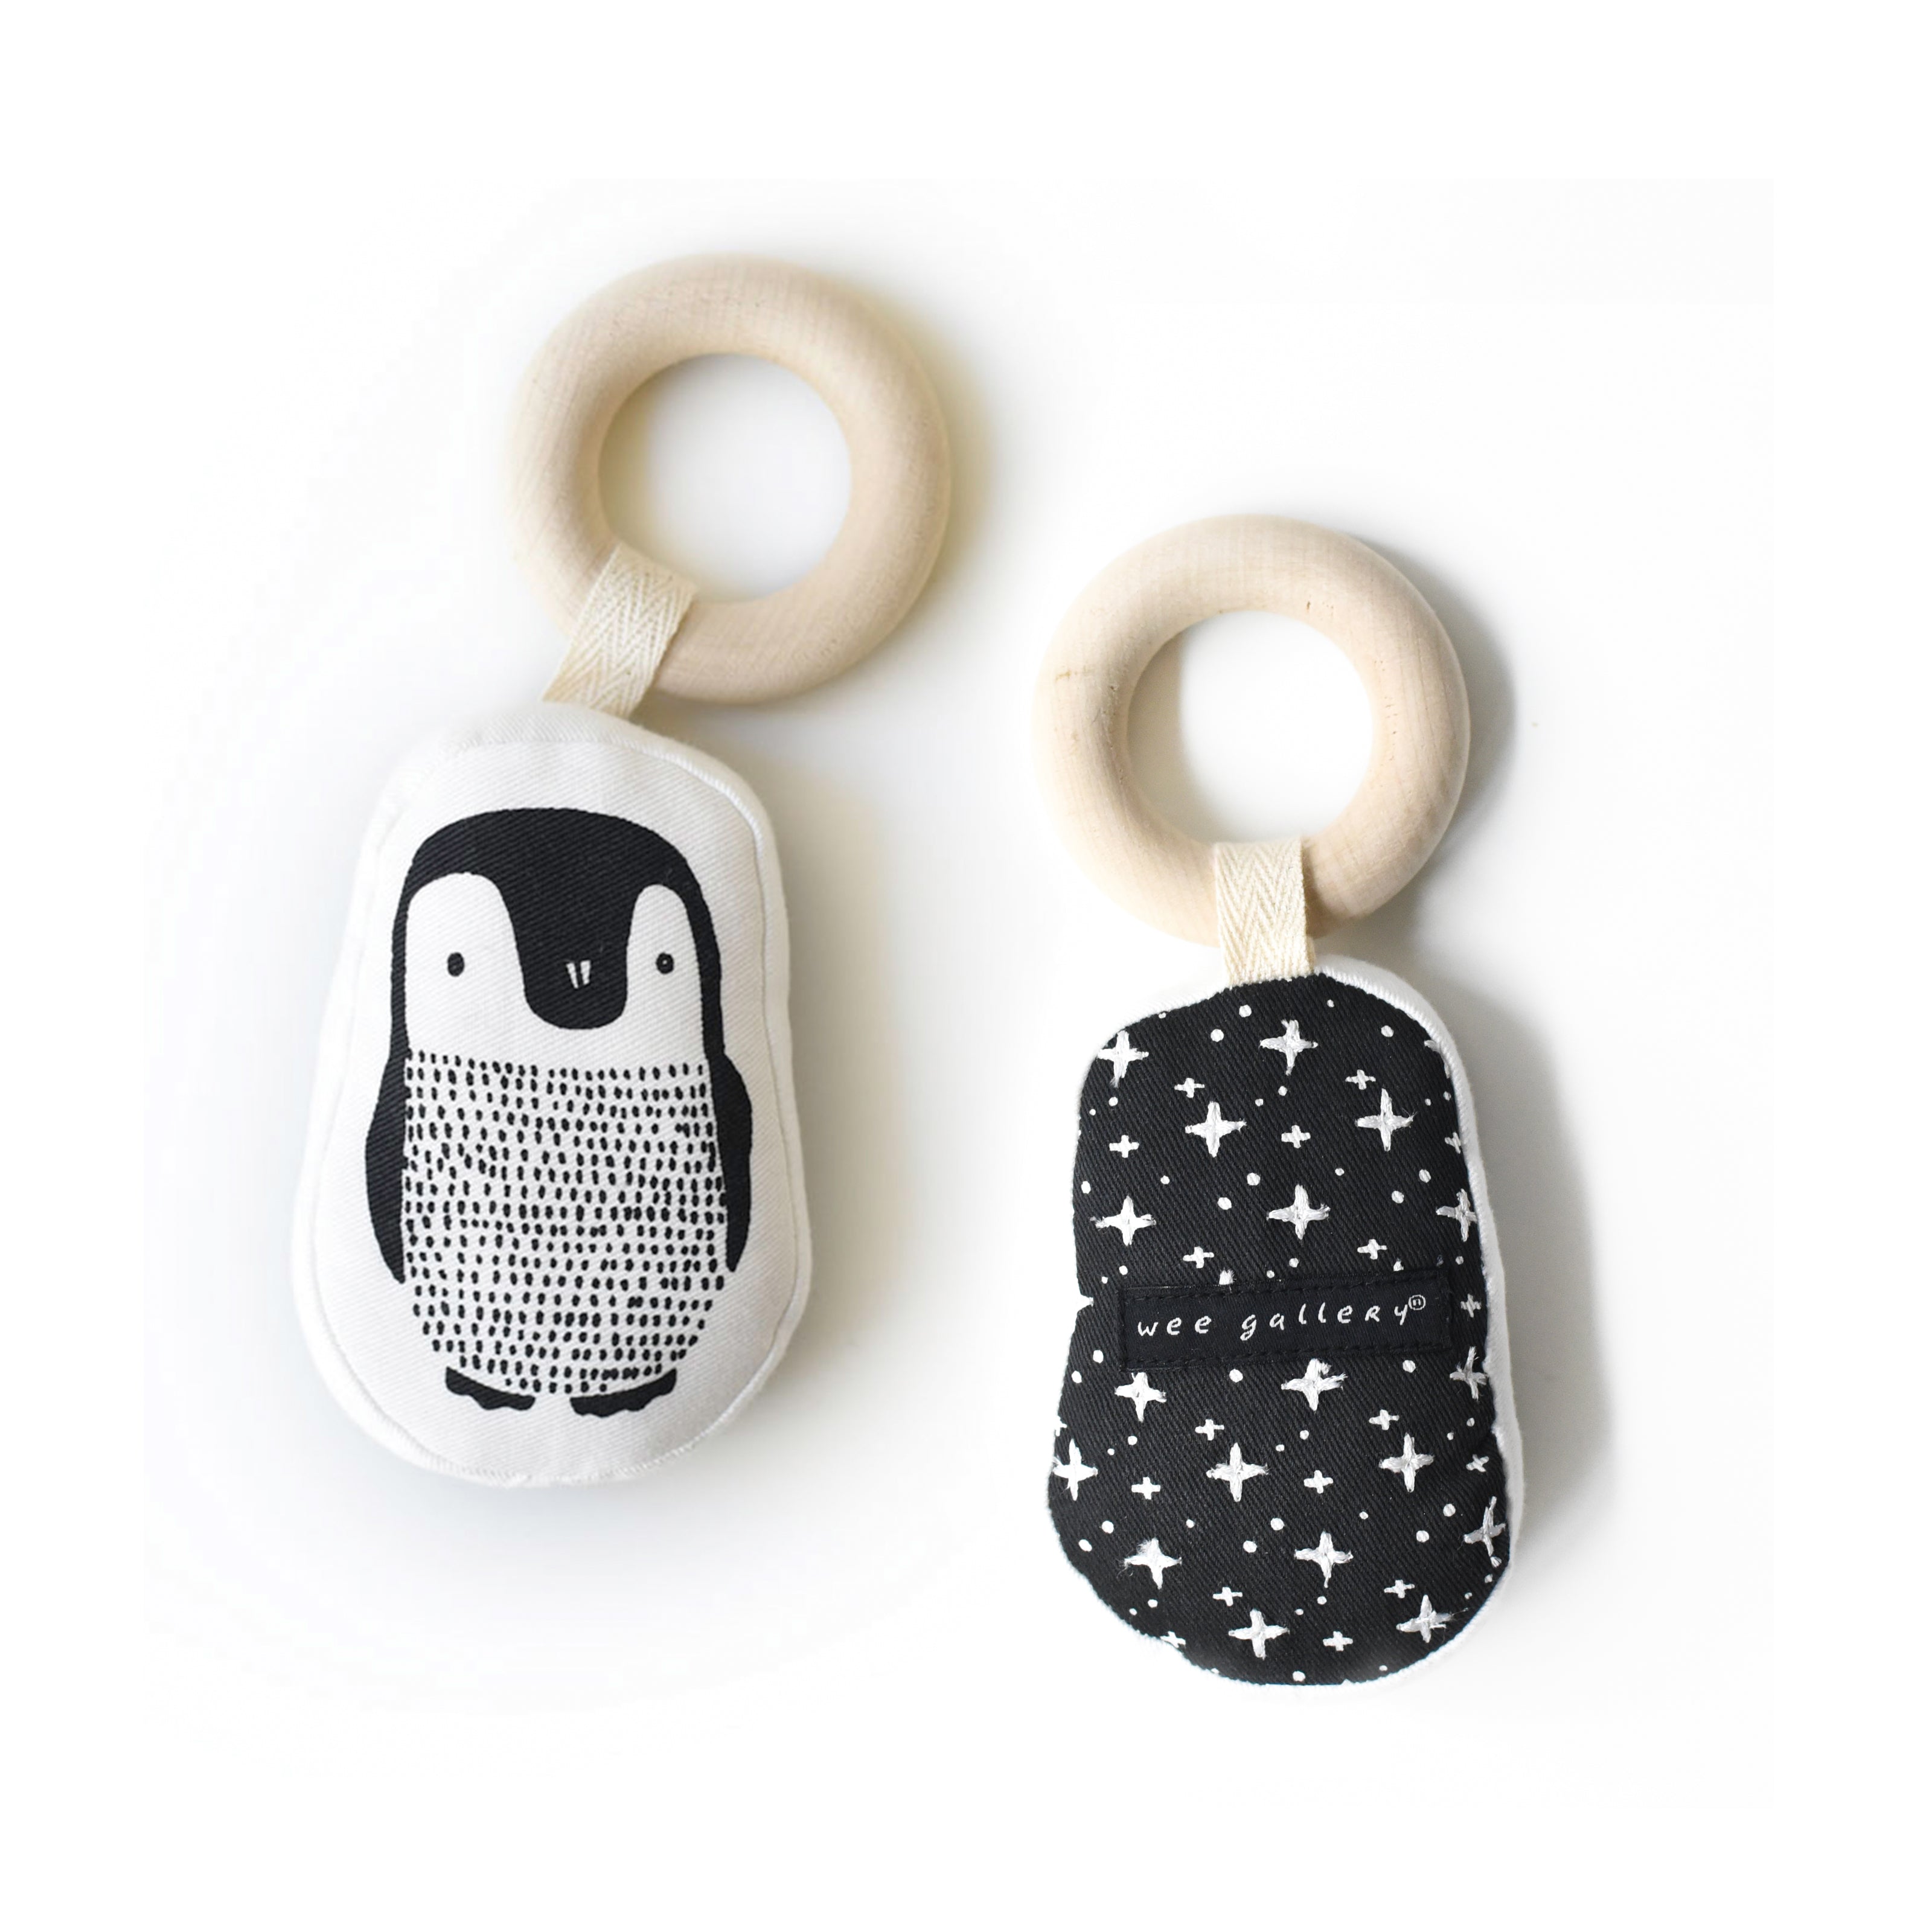 Wee Gallery Penguin Teether - Organic Cotton with Wooden Ring